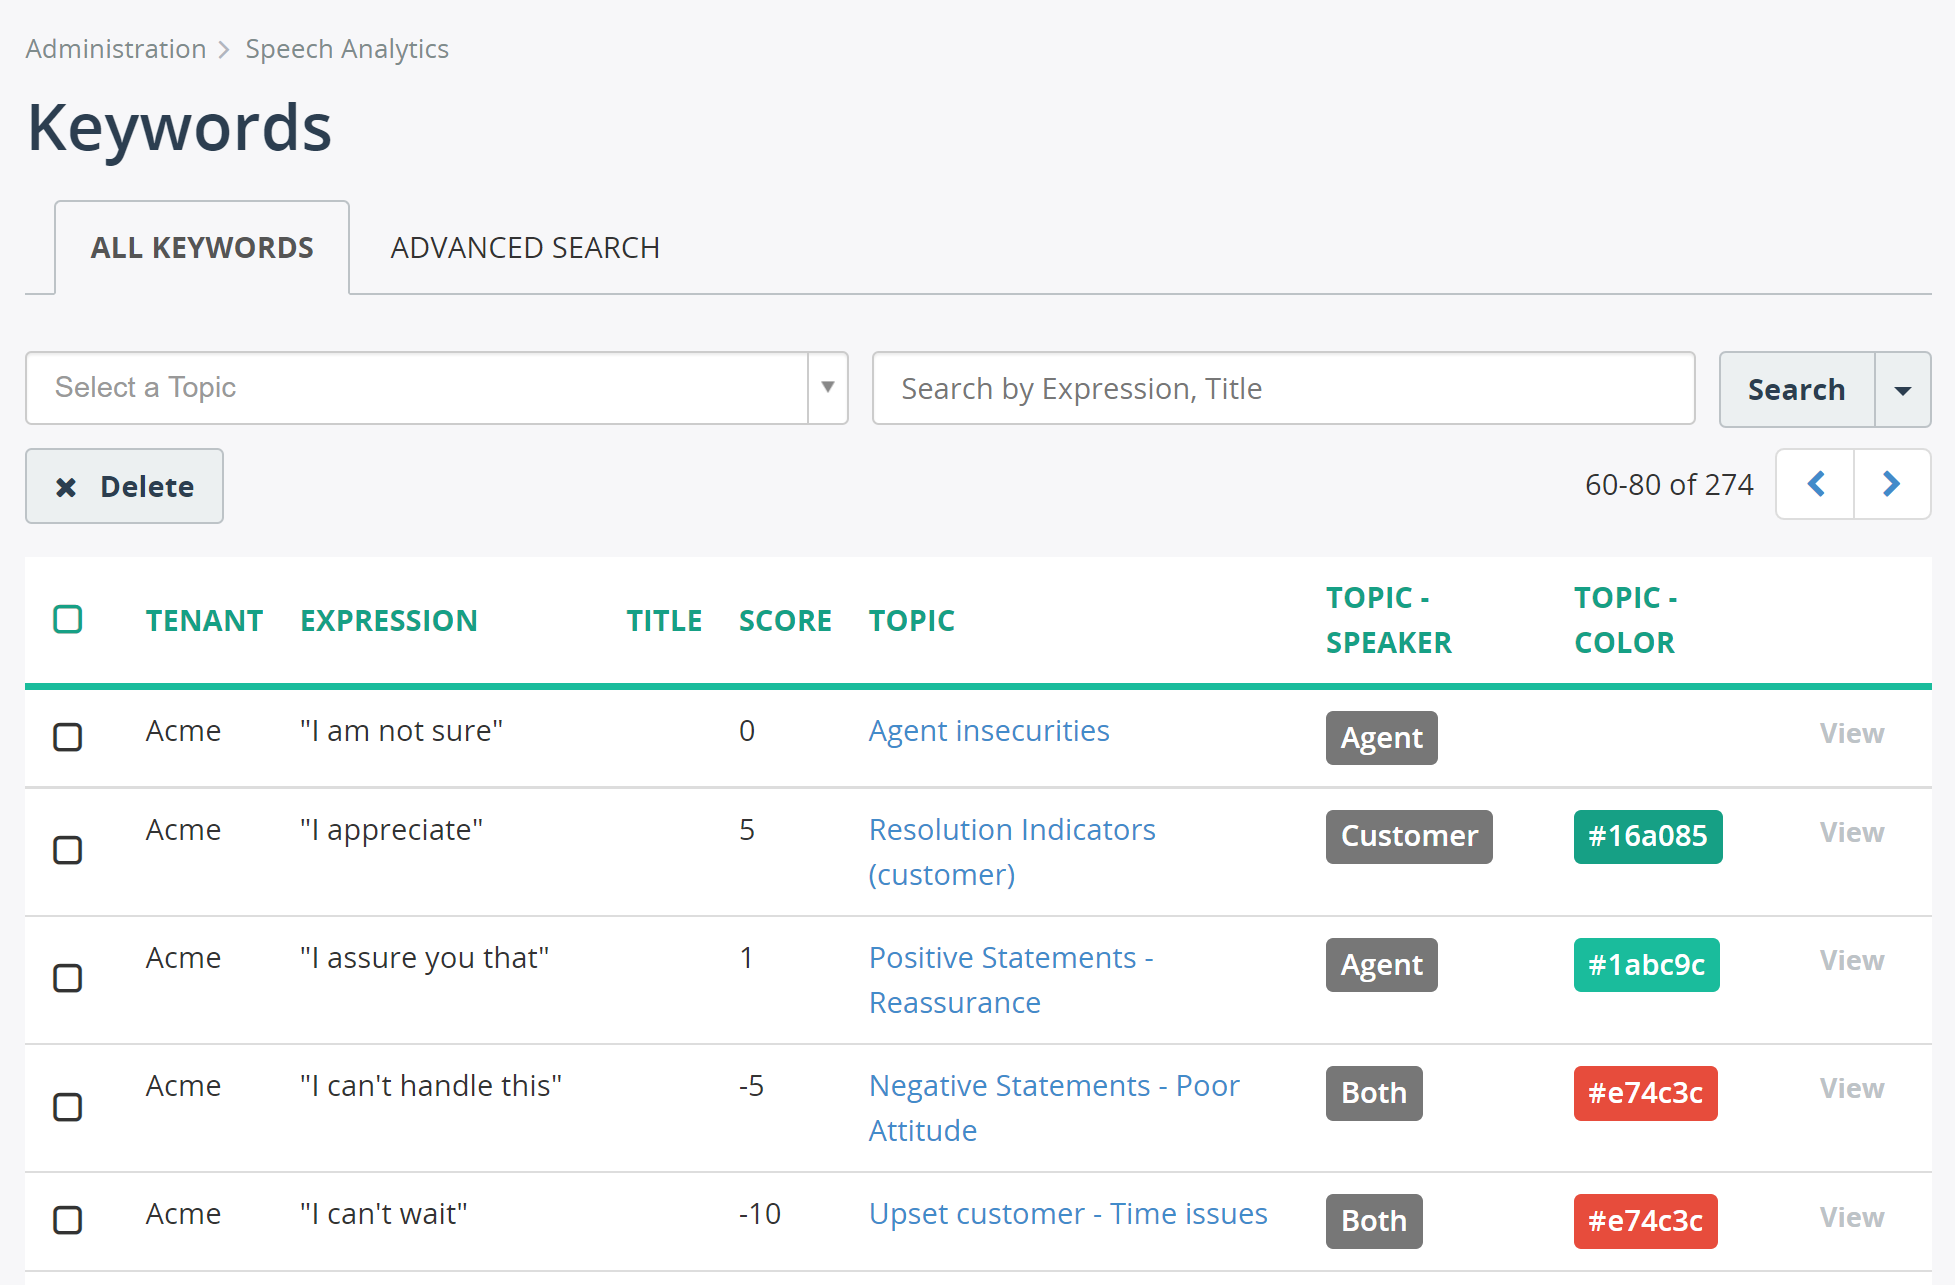 Add Keywords page for fast search of all keywords across multiple Topics